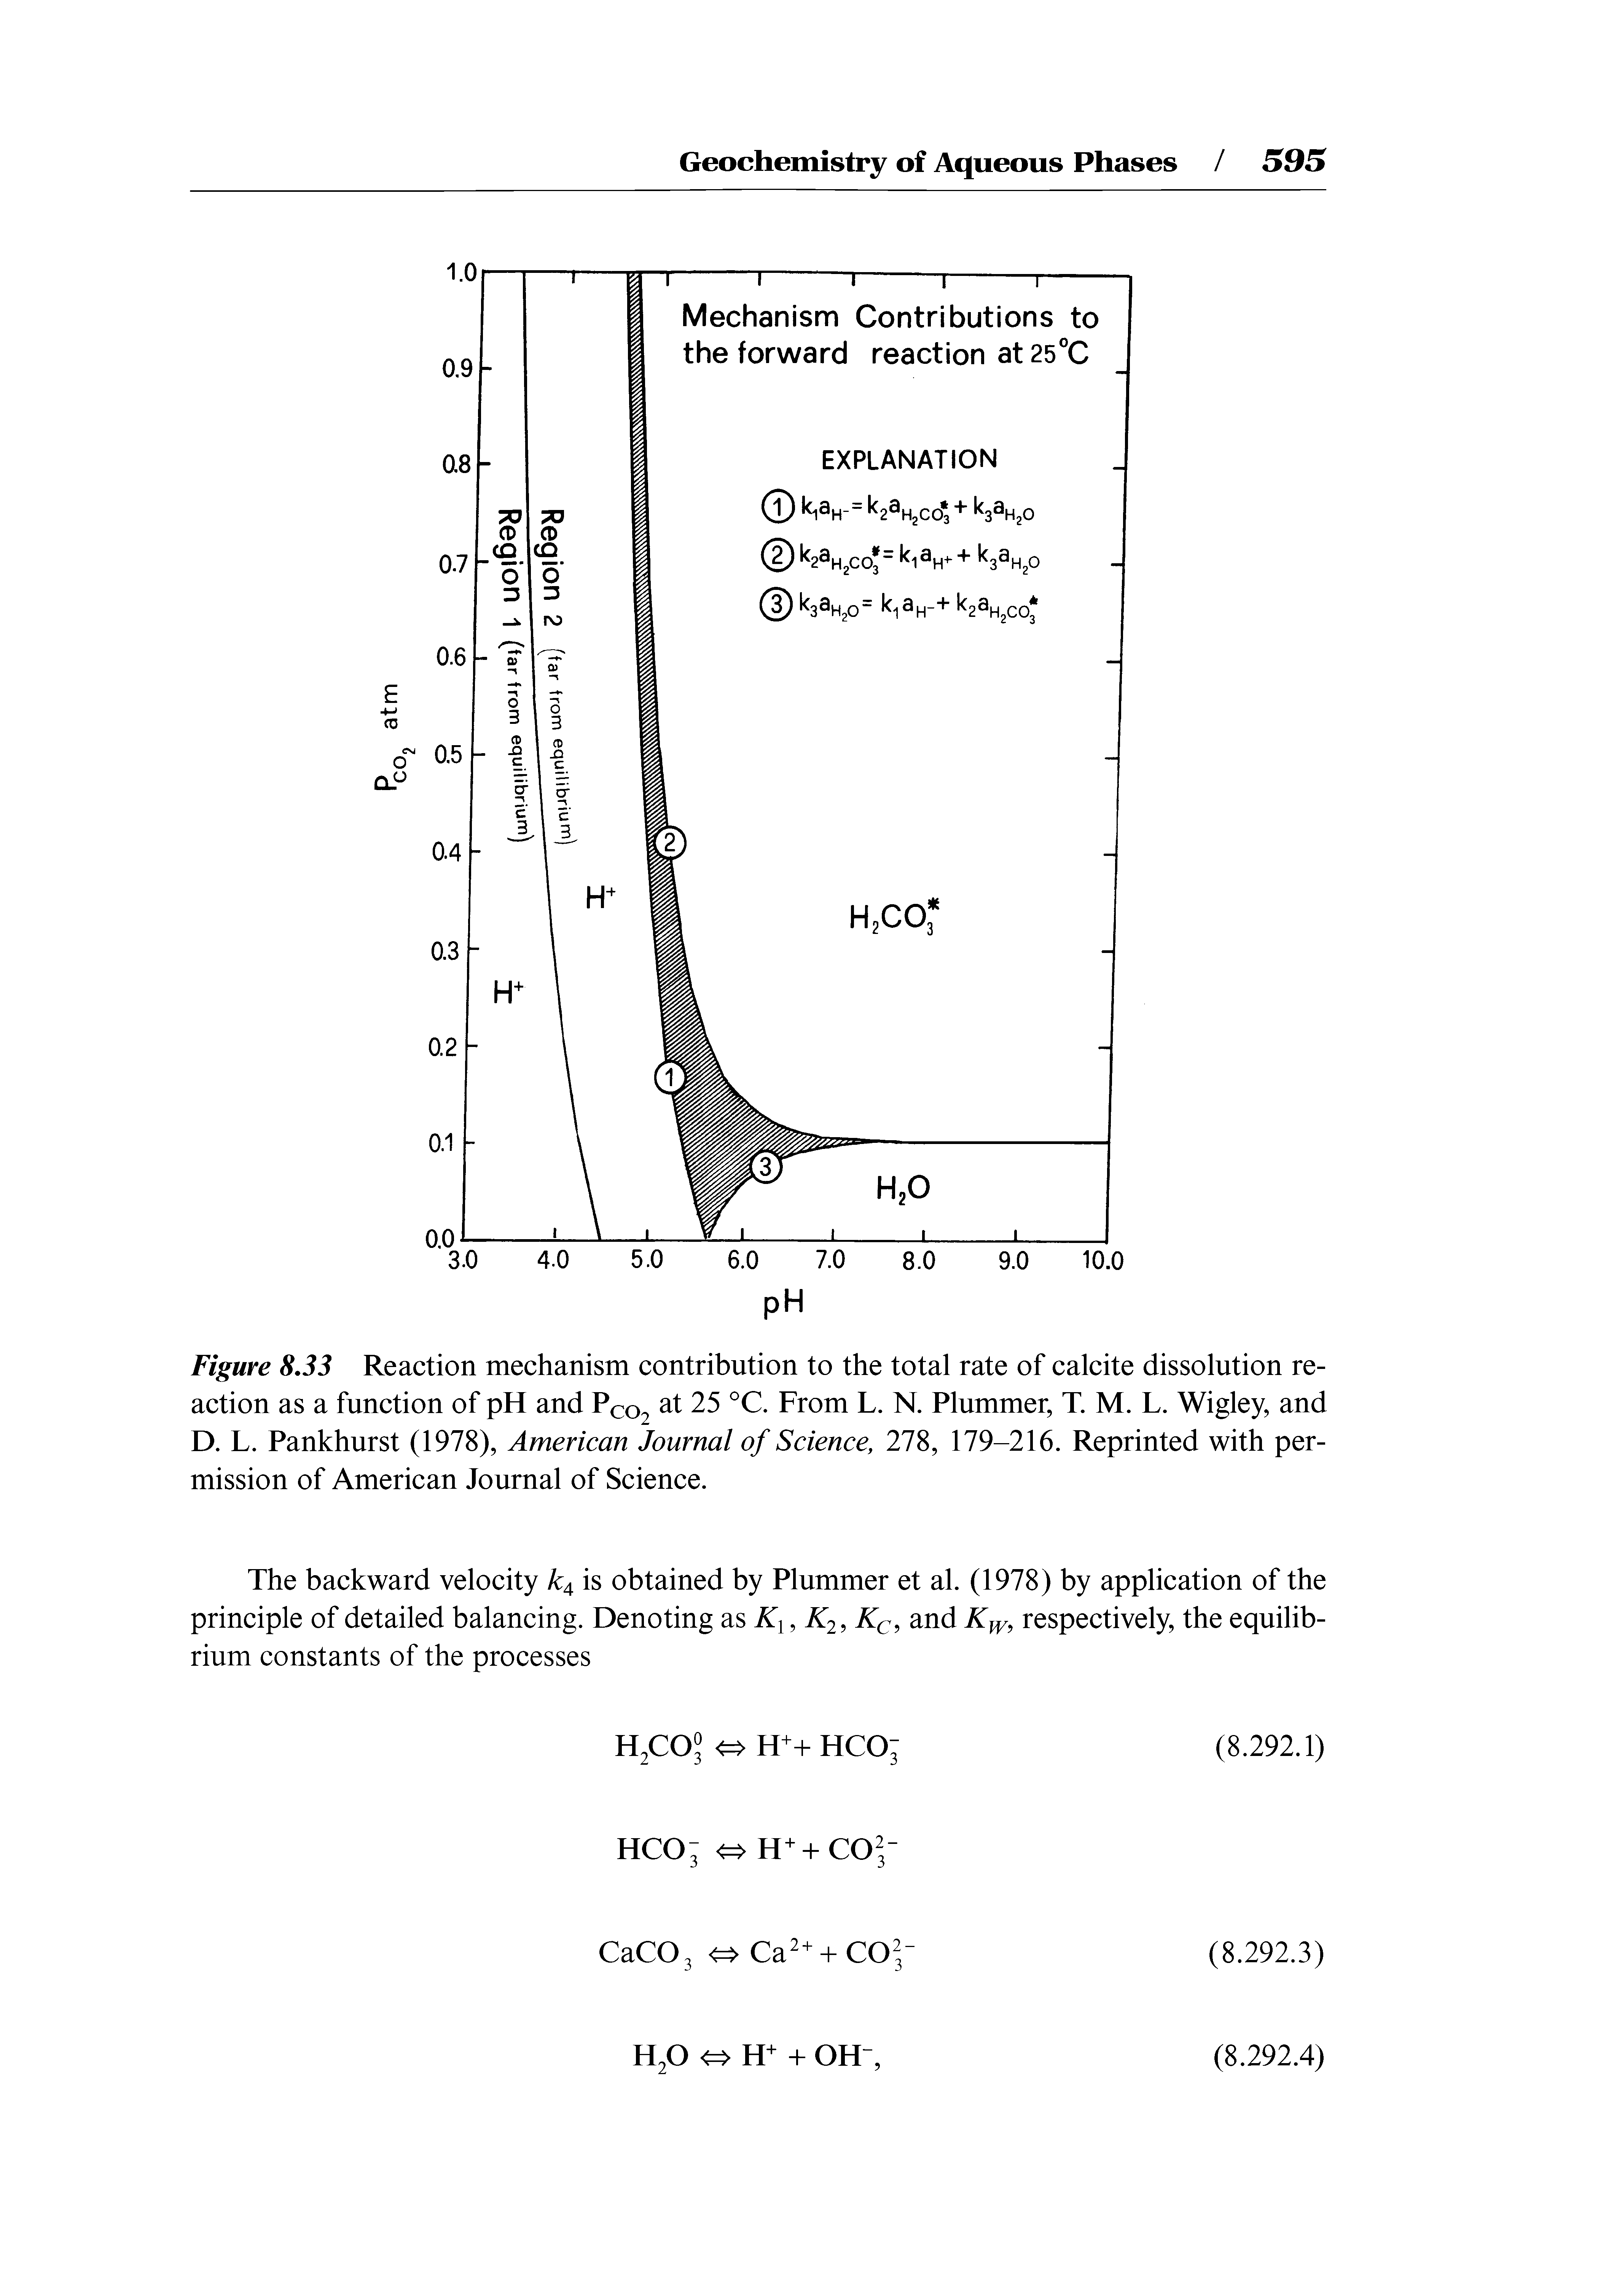 Figure 8.33 Reaction mechanism contribution to the total rate of calcite dissolution reaction as a function of pH and Pco2 25 °C. From L. N. Plummer, T. M. L. Wigley, and D. L. Pankhurst (1978), American Journal of Science, 278, 179-216. Reprinted with permission of American Journal of Science.